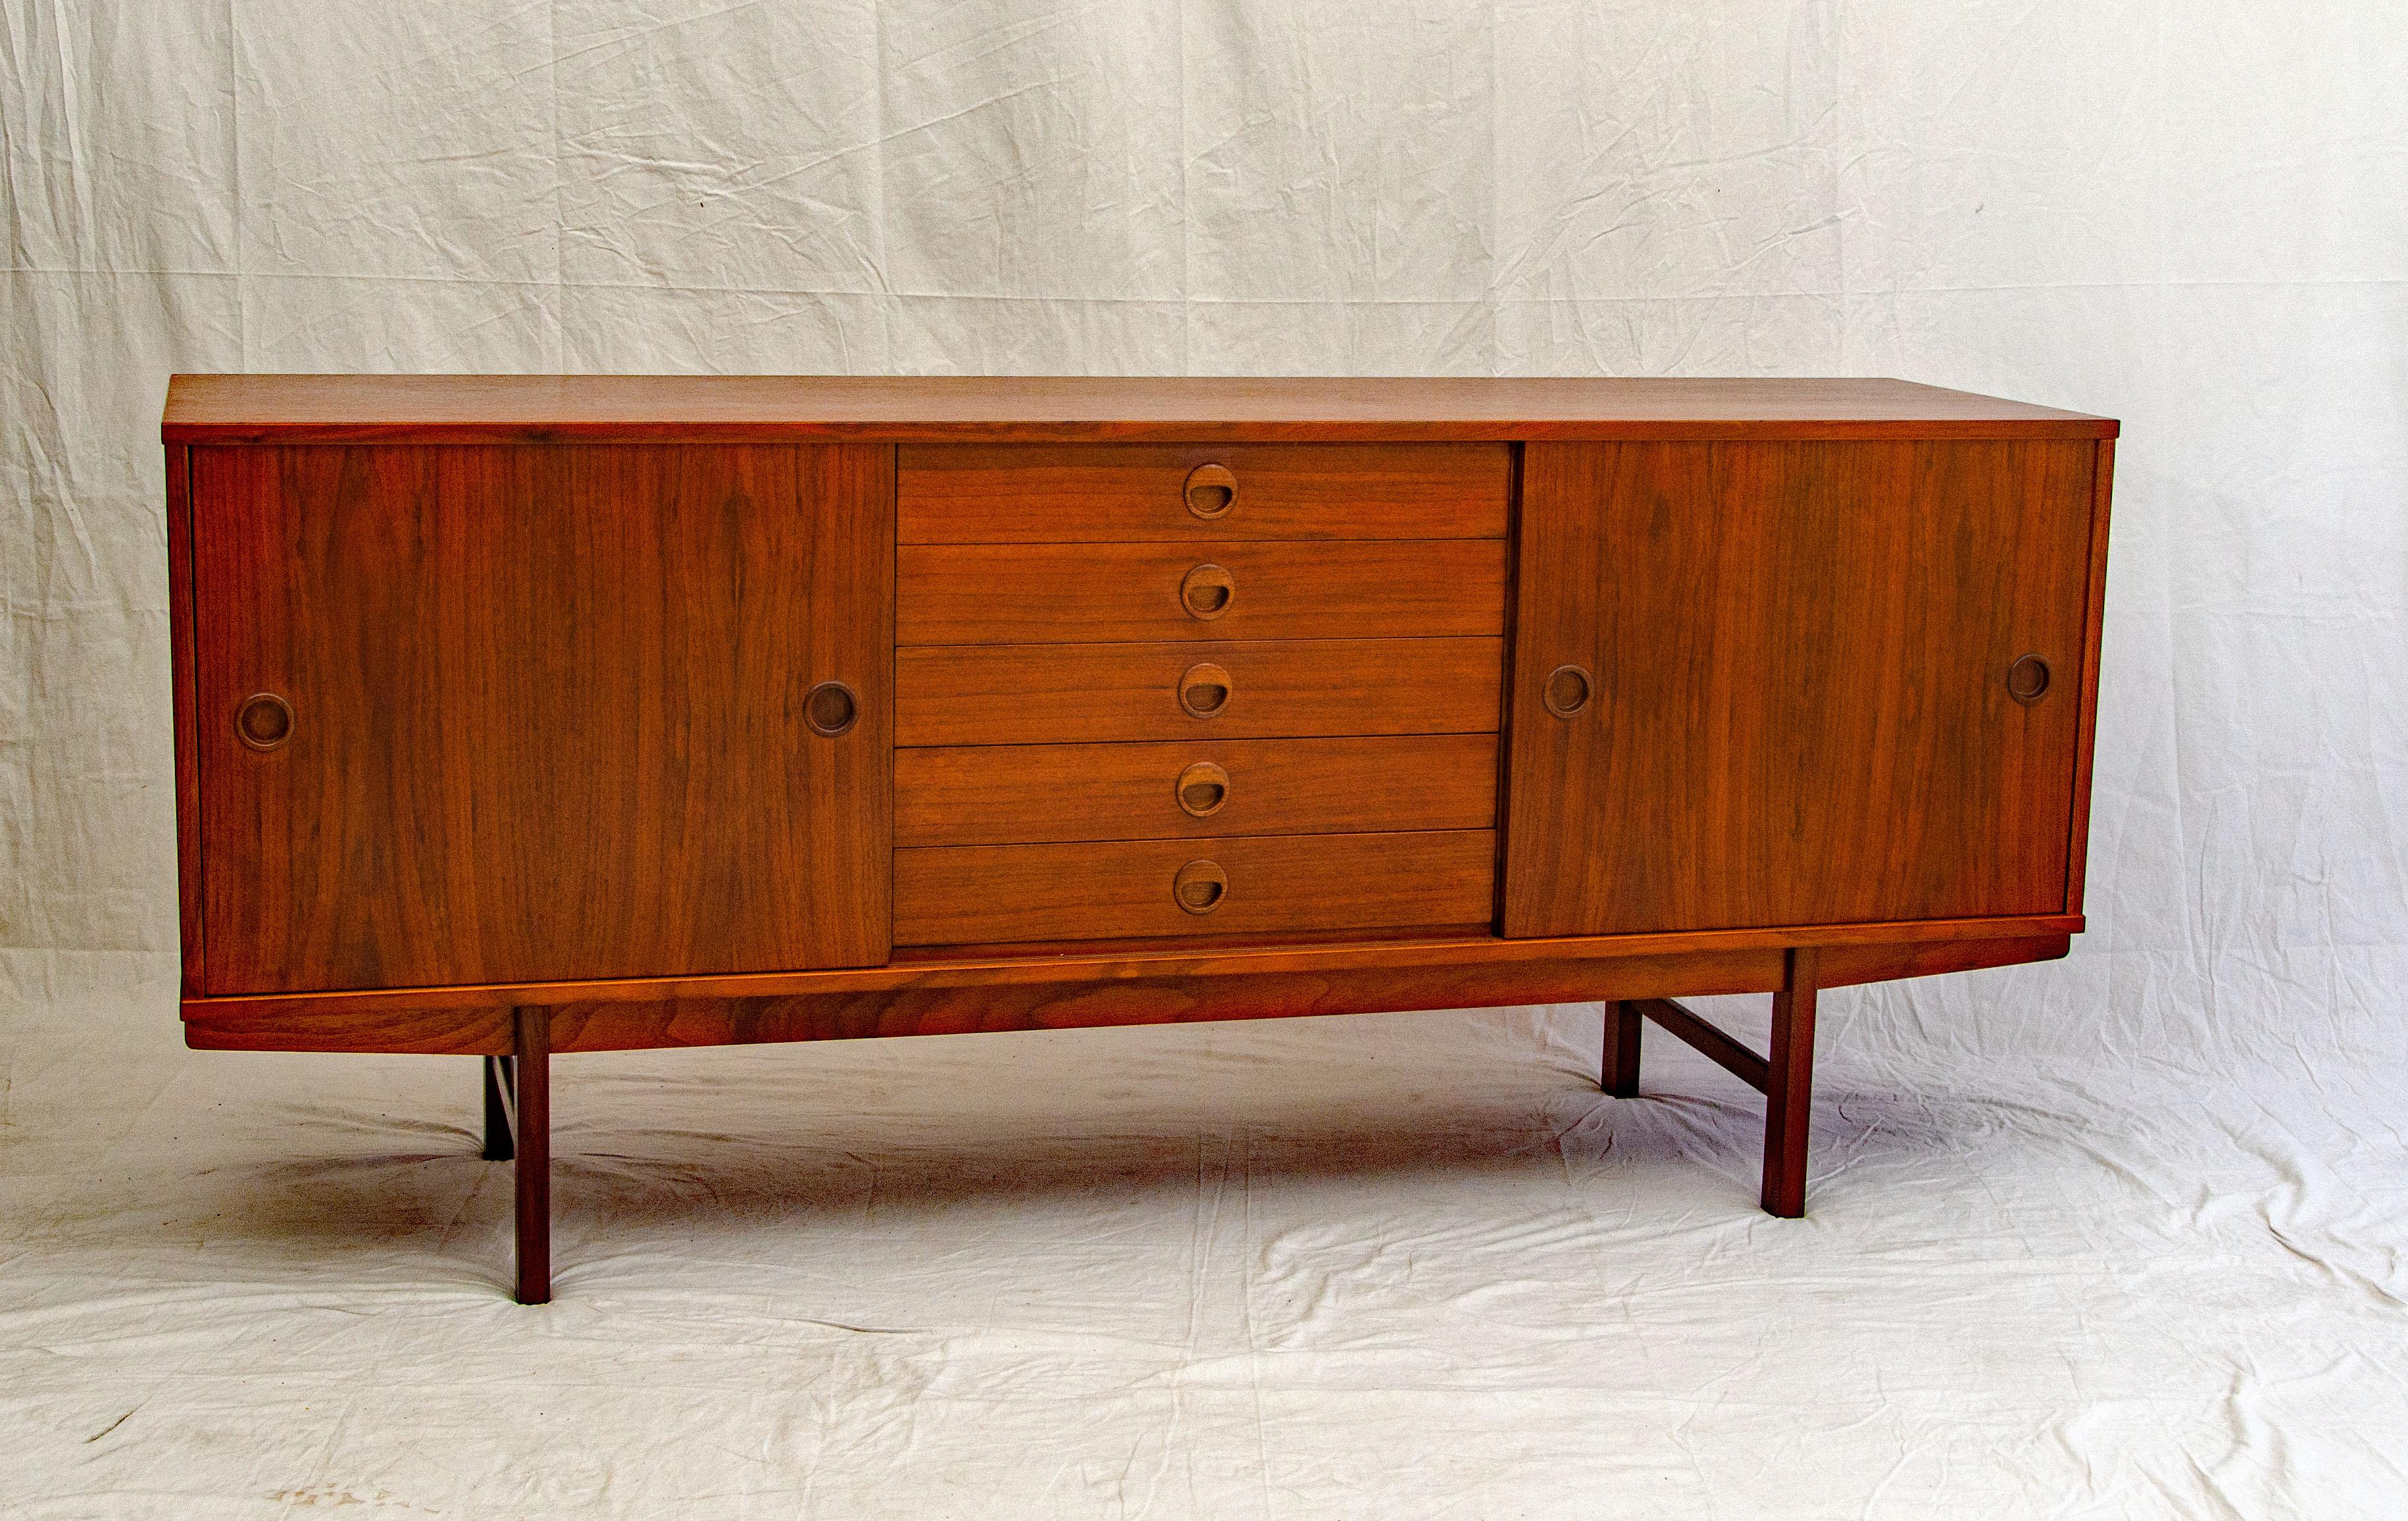 This walnut credenza by DUX of Sweden has five drawers, two sliding doors, and a sled base. There are two adjustable shelves that slide in and out on wire supports. DUX signature on the base.